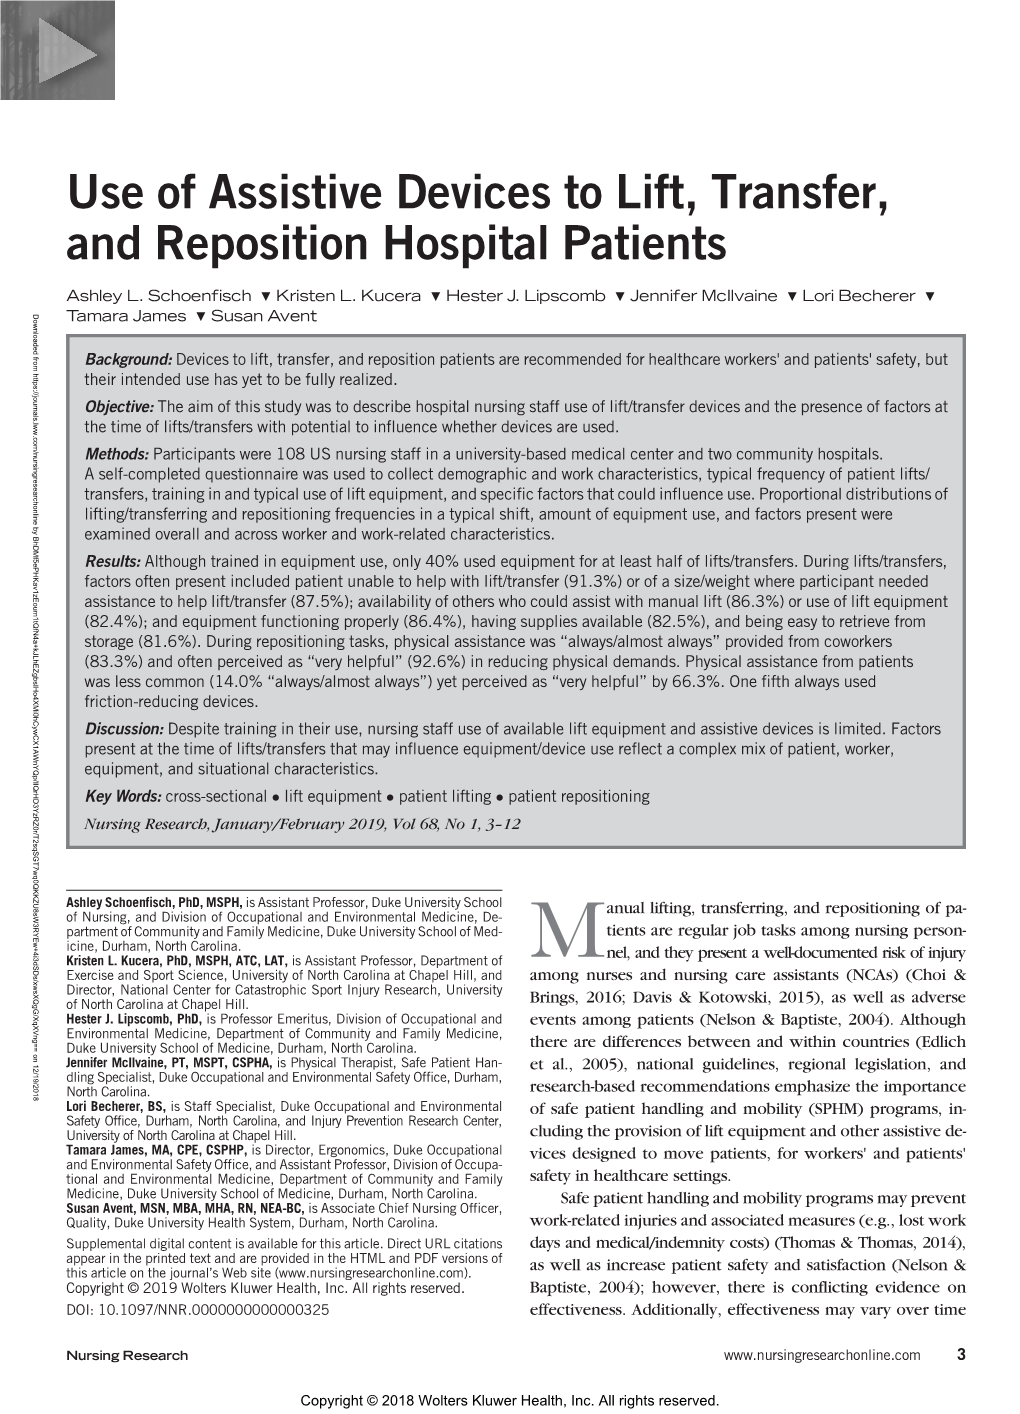 Use of Assistive Devices to Lift, Transfer, and Reposition Hospital